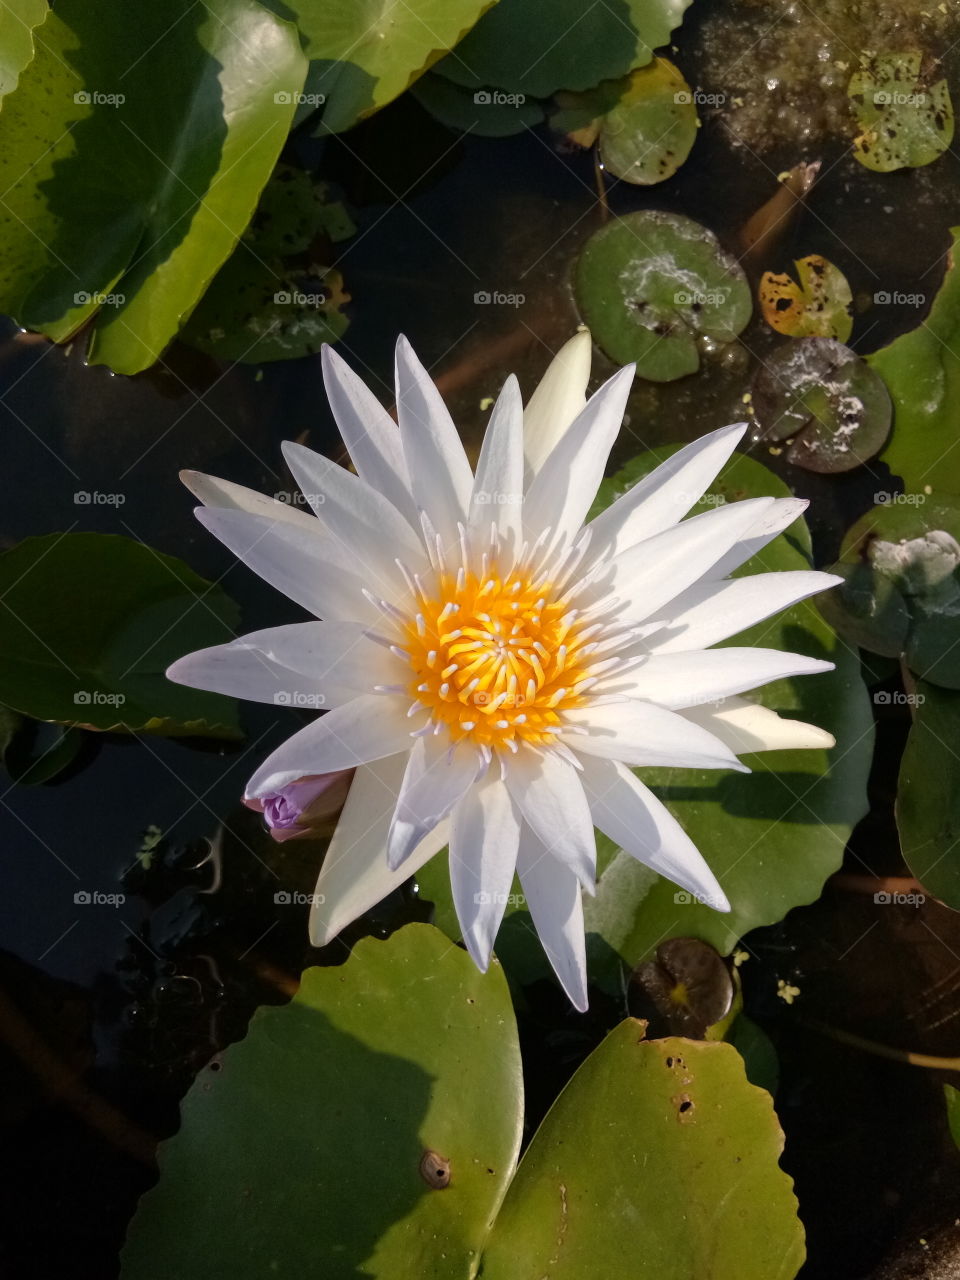 Lotus
beautiful 
flower
flora
lily
green
nature
thailand